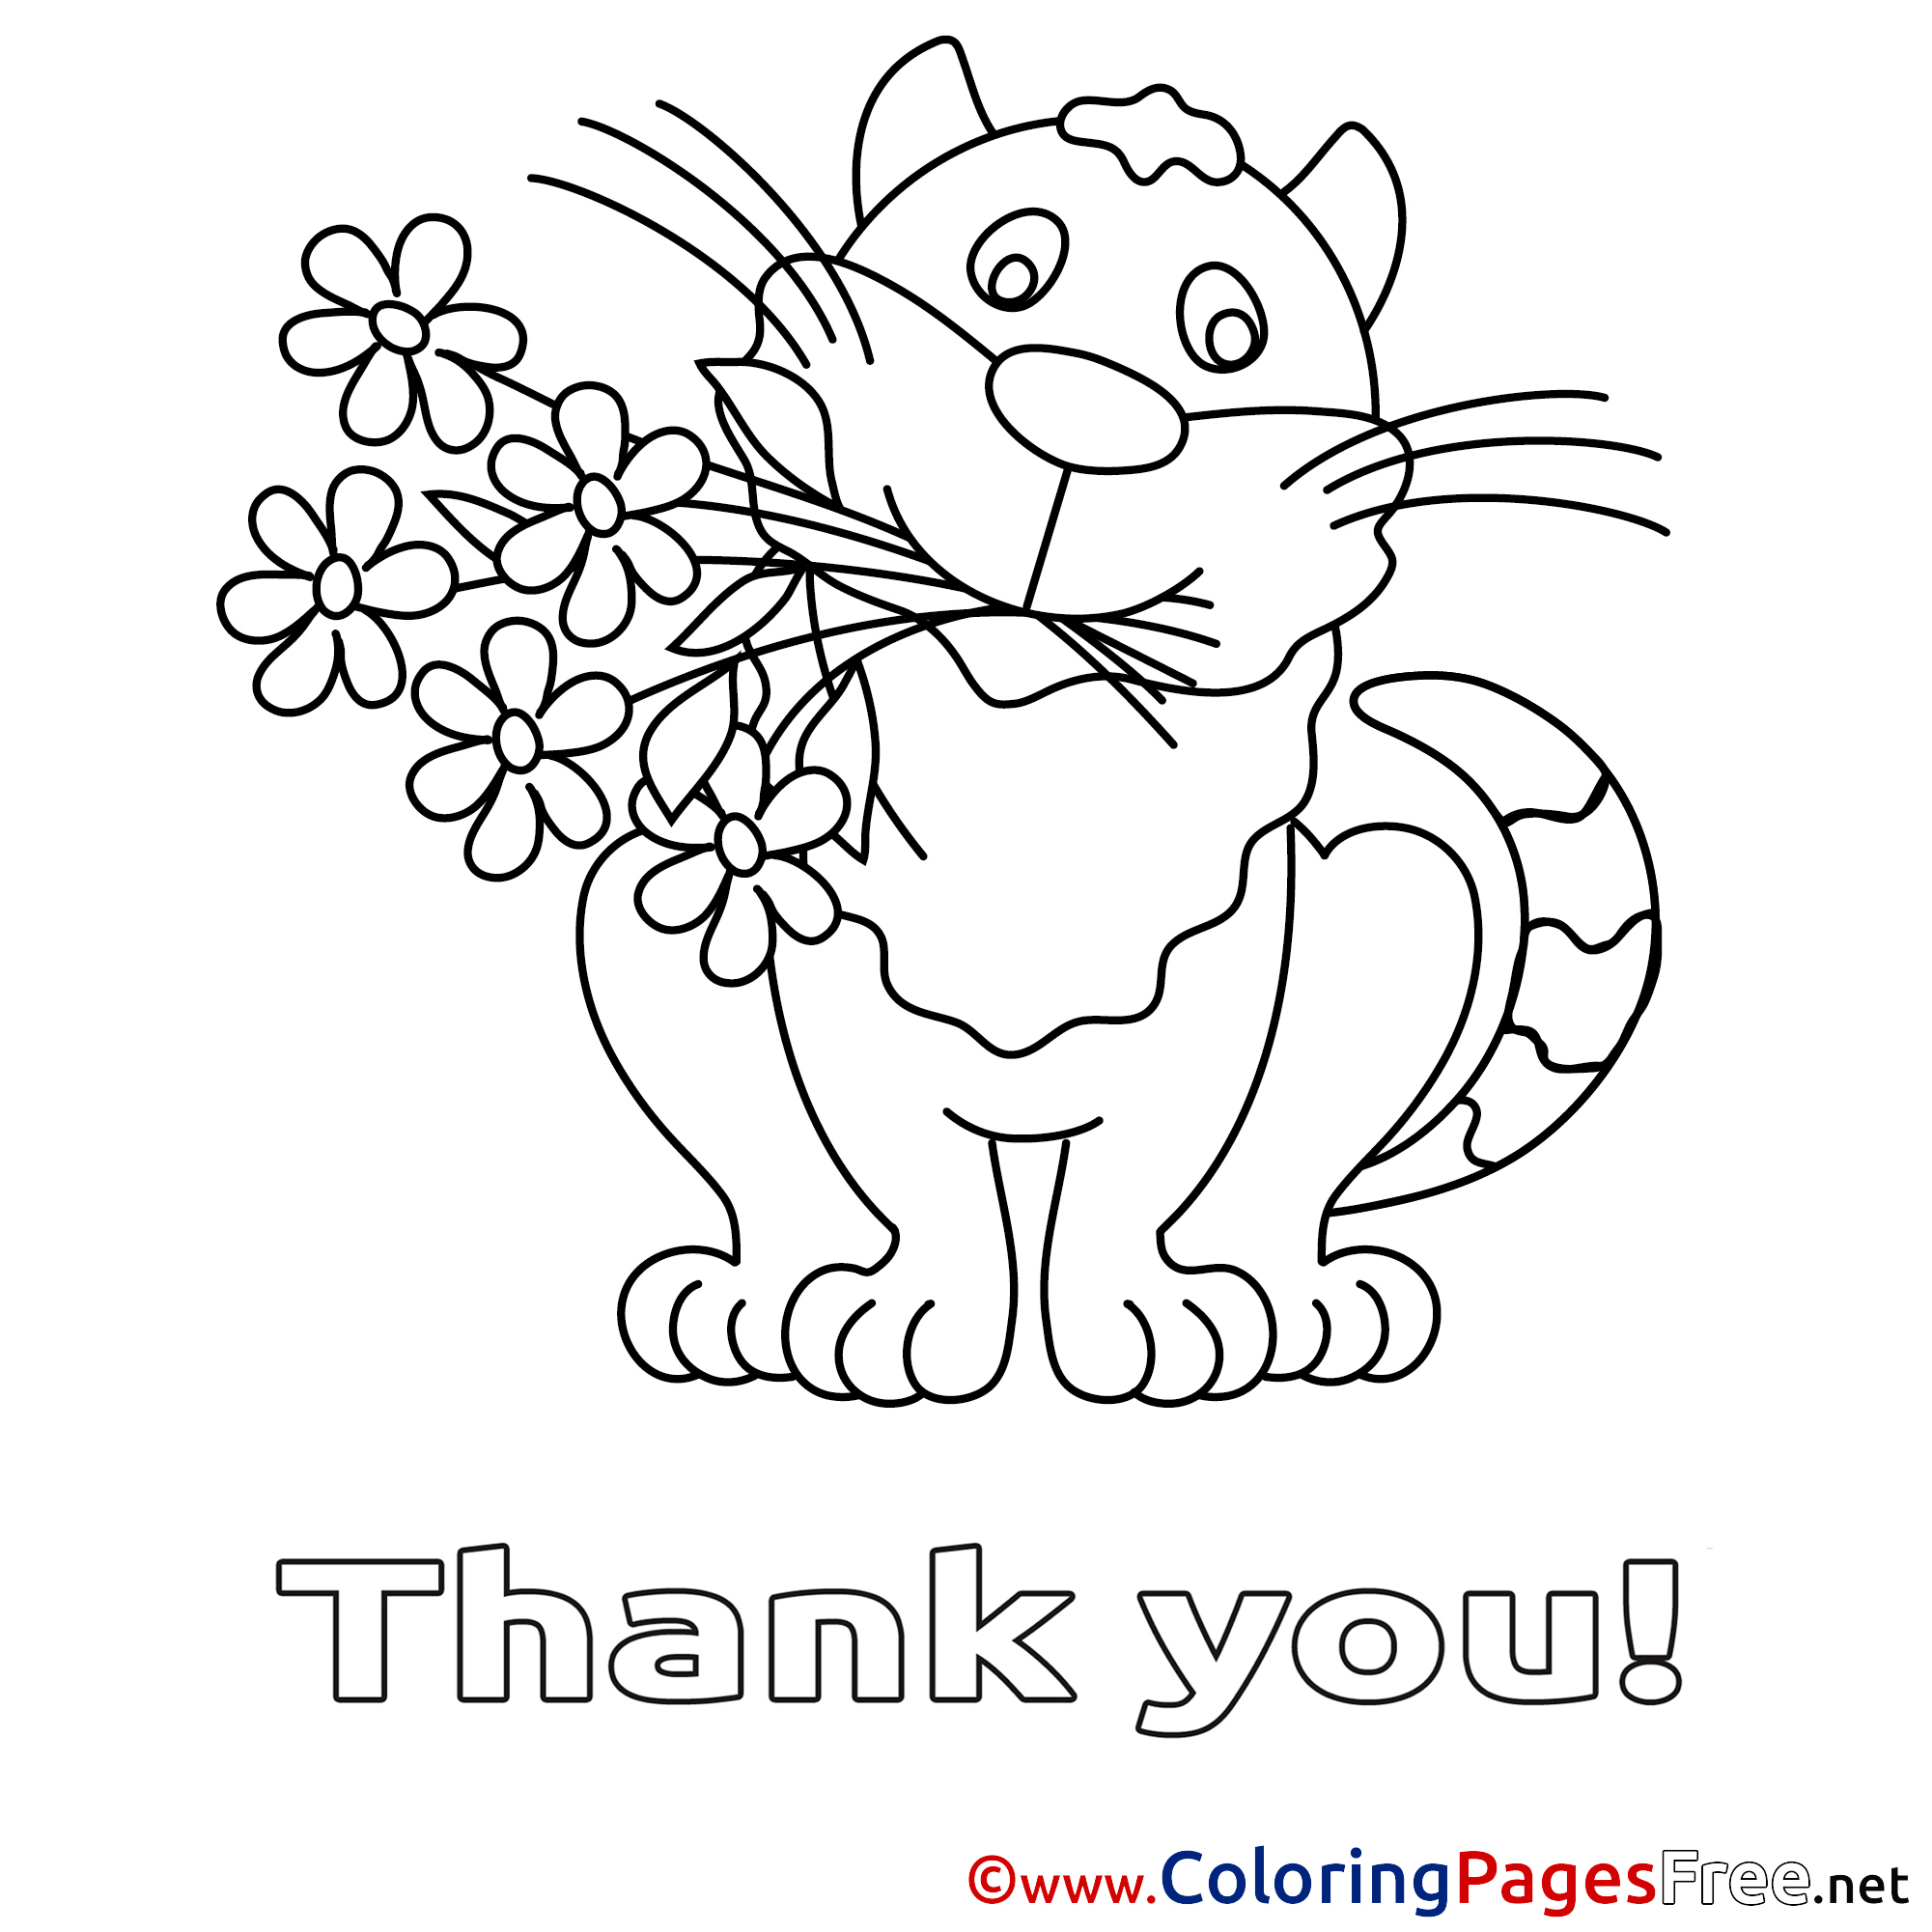 Cat Children Thank You Colouring Page